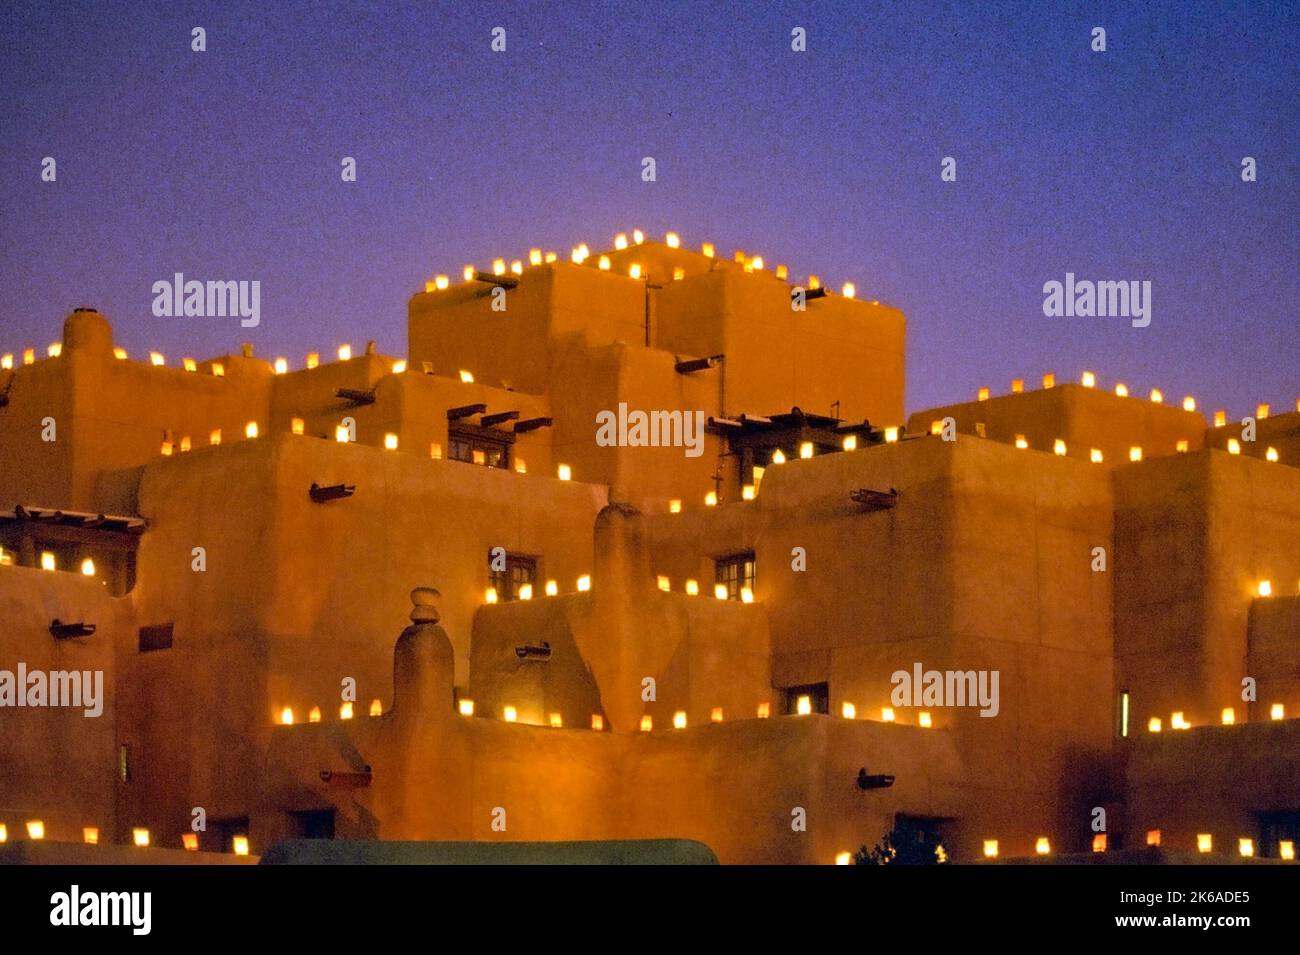 Luminara lights decorate a Pueblo style building in Santa Fe, New Mexico, at Christmas. A luminaria or farolito is a small candle set in sand inside a Stock Photo